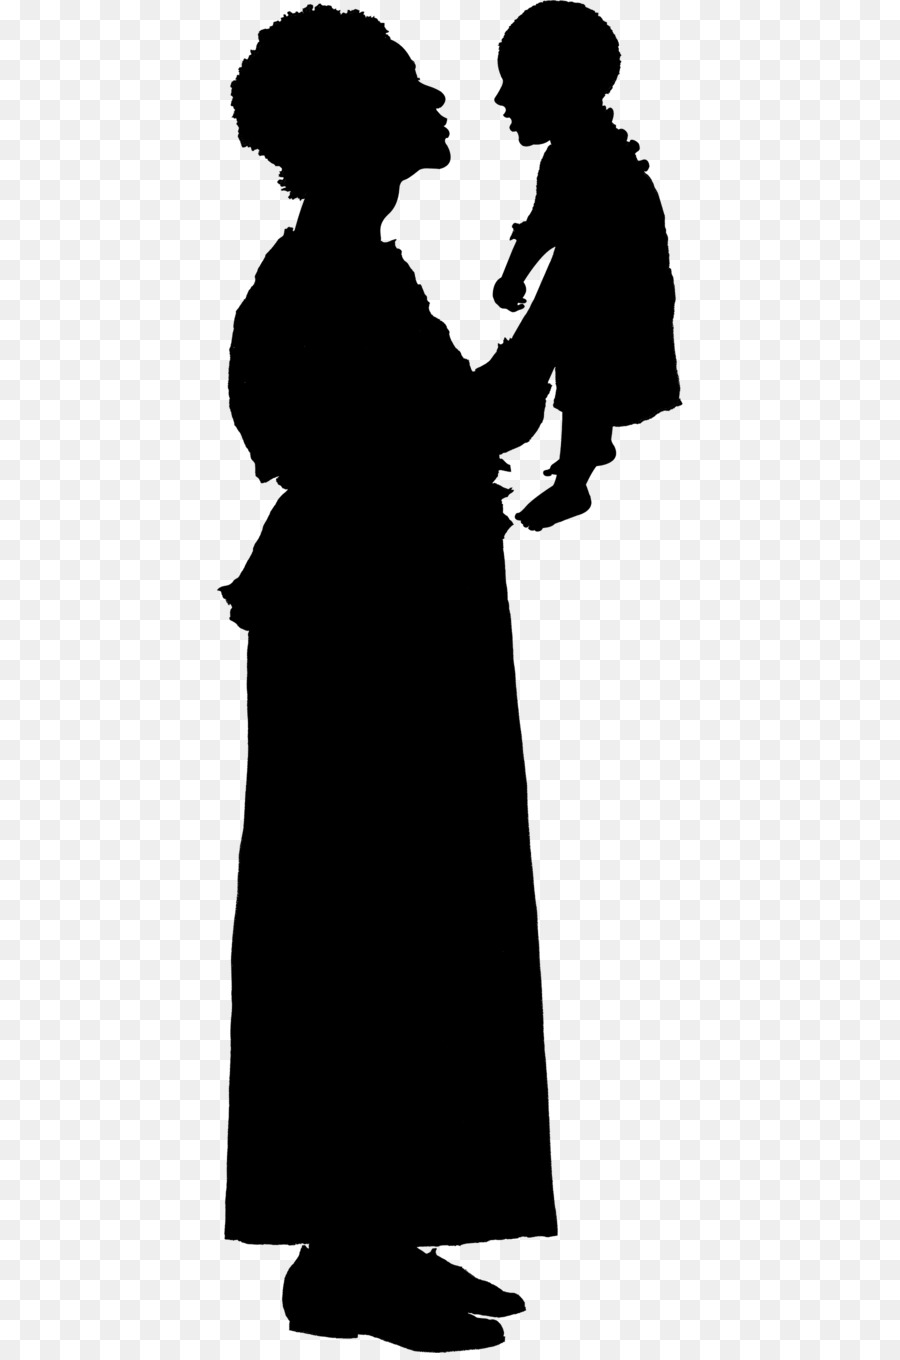 Mount Vernon Fred W. Smith National Library for the Study of George Washington The Escape of Oney Judge Taking liberty Silhouette - working woman png download - 1800*2706 - Free Transparent  png Download.